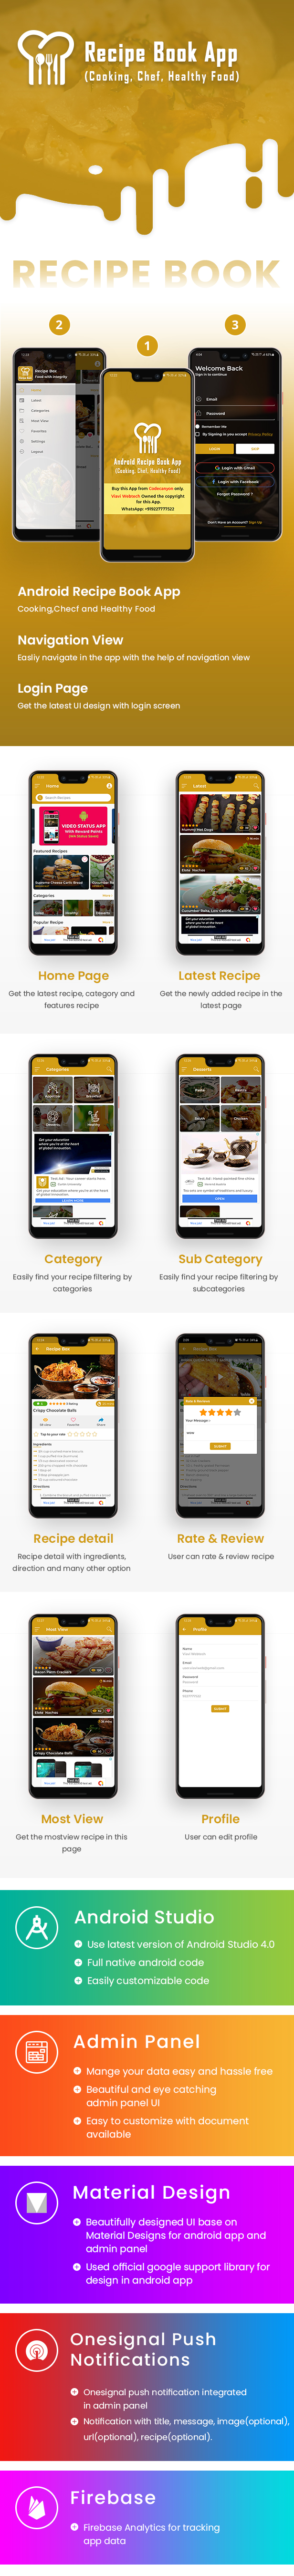 Android Recipe Book App (Cooking,Chef,Healthy Food, Admob with GDPR) - 8